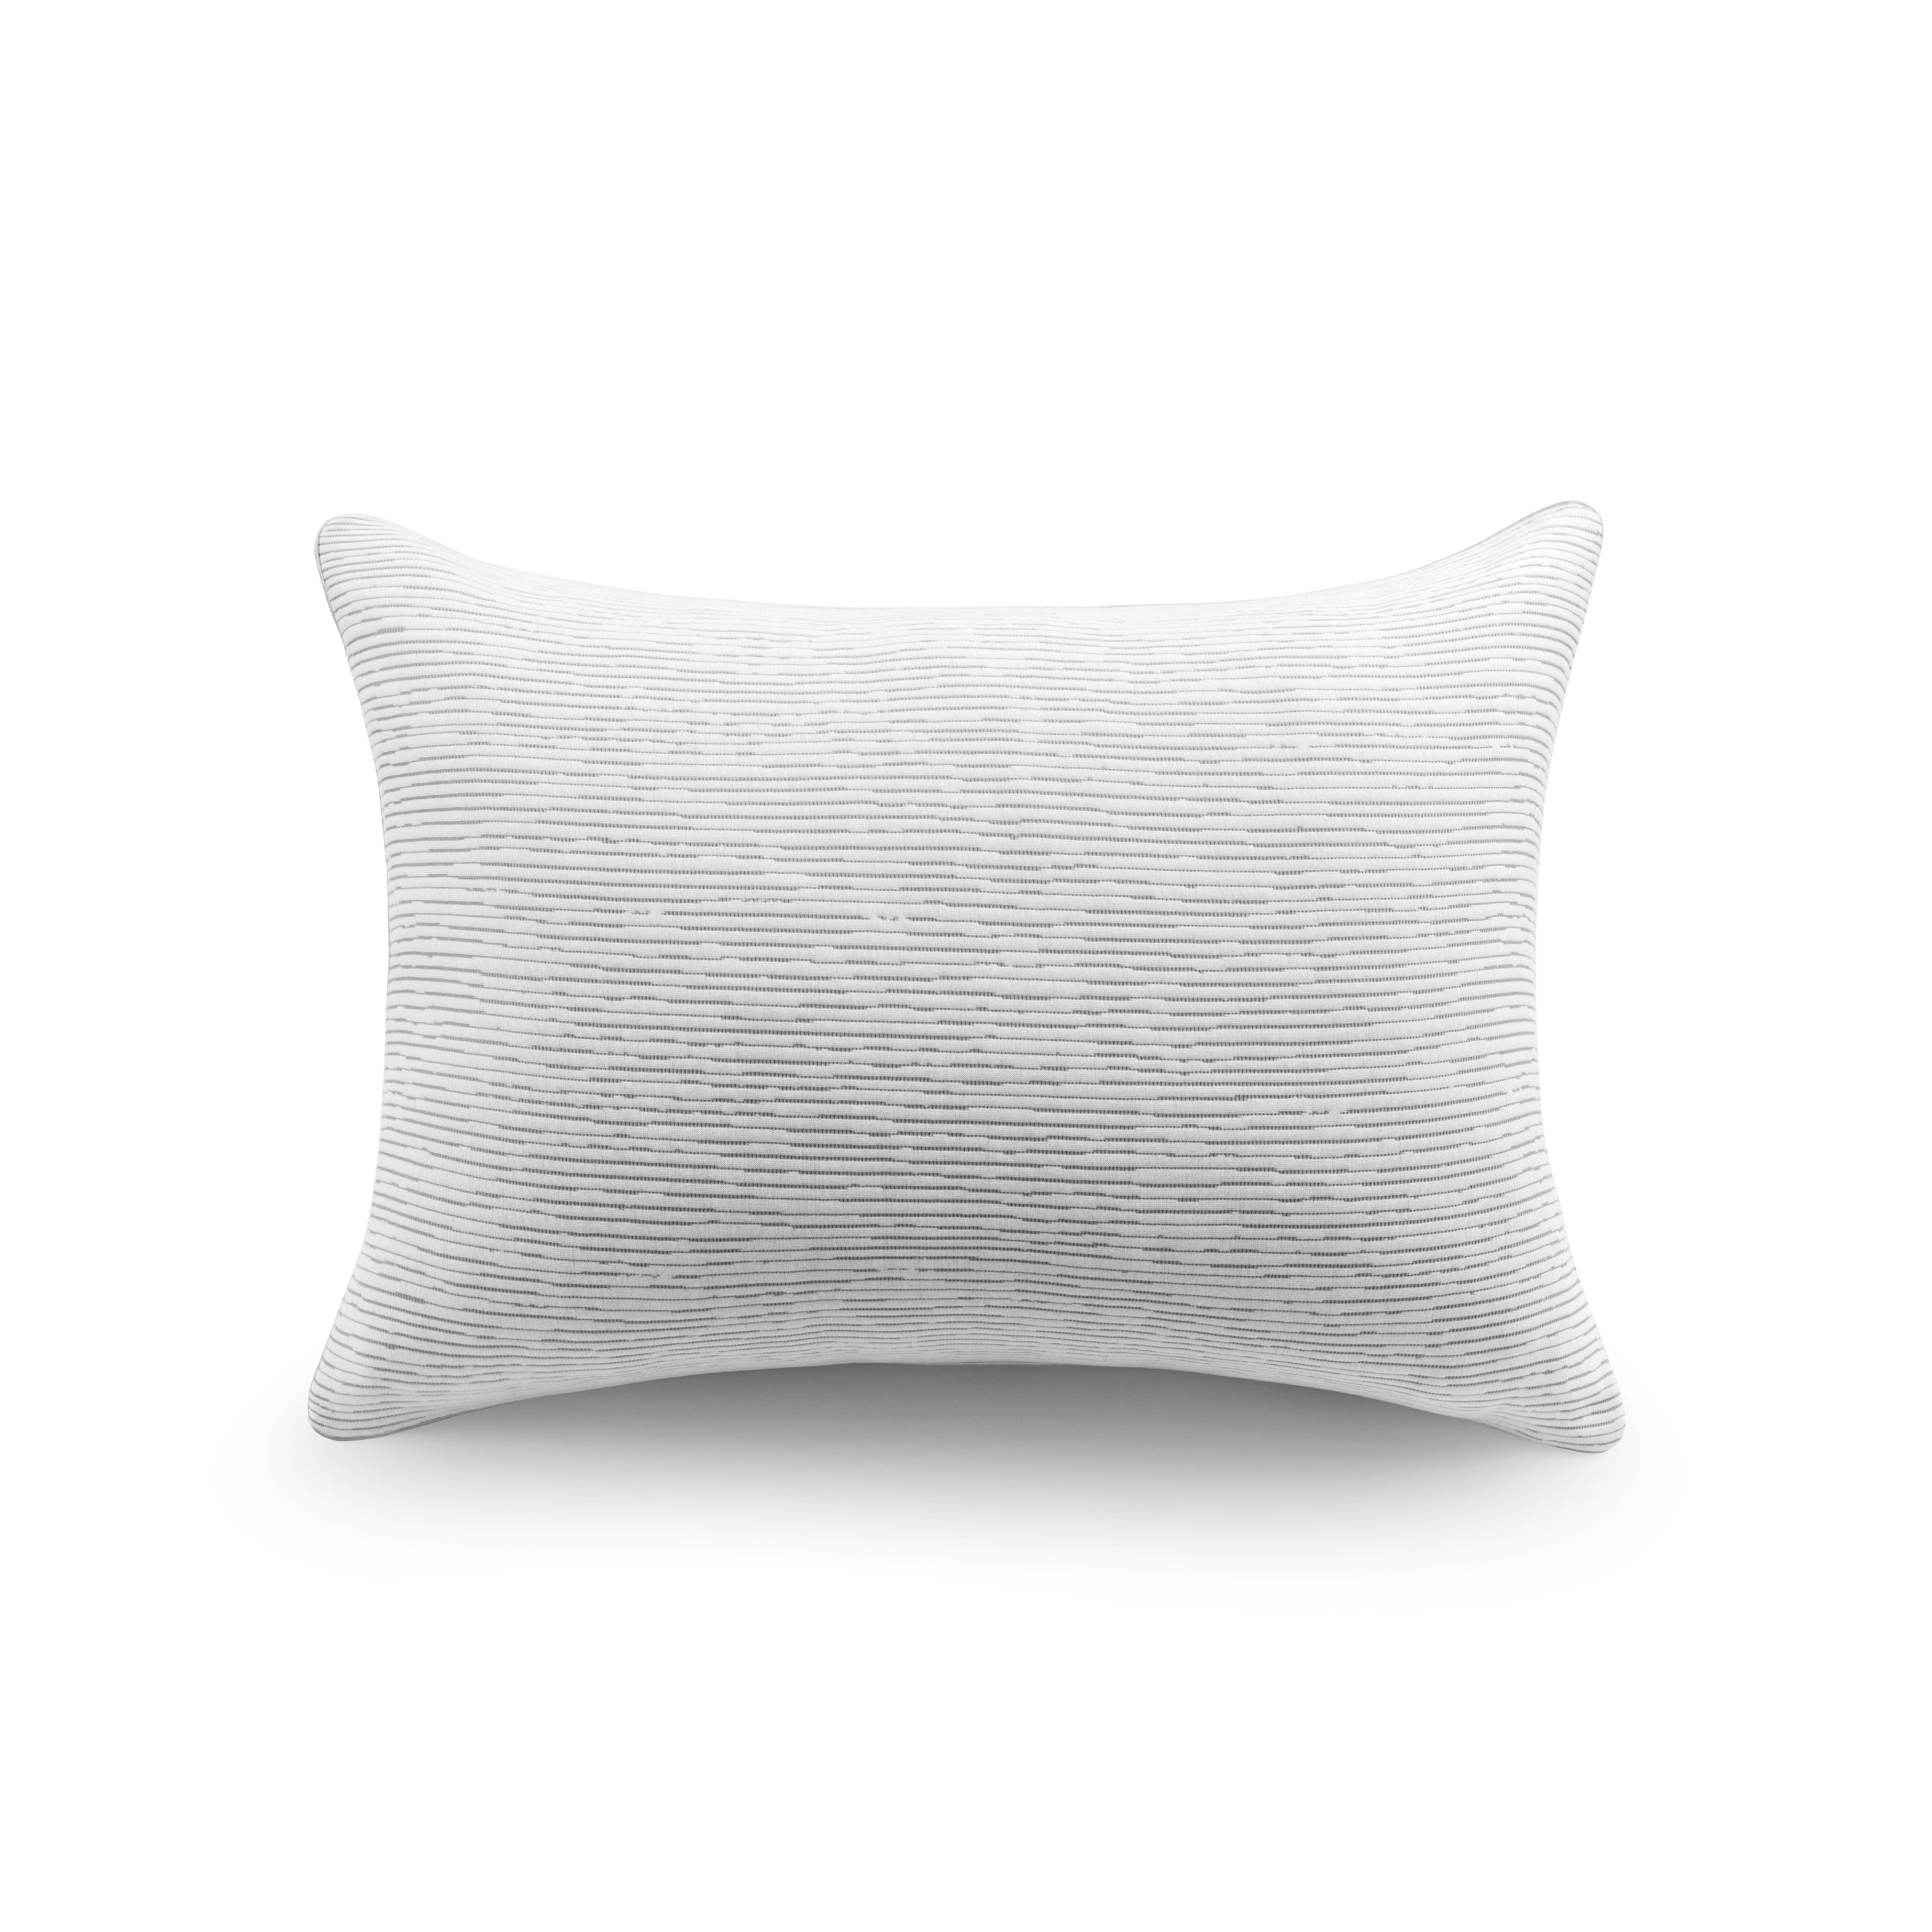 MyPillow Classic Standard Size Will Never go Flat 18.5" x 26" 